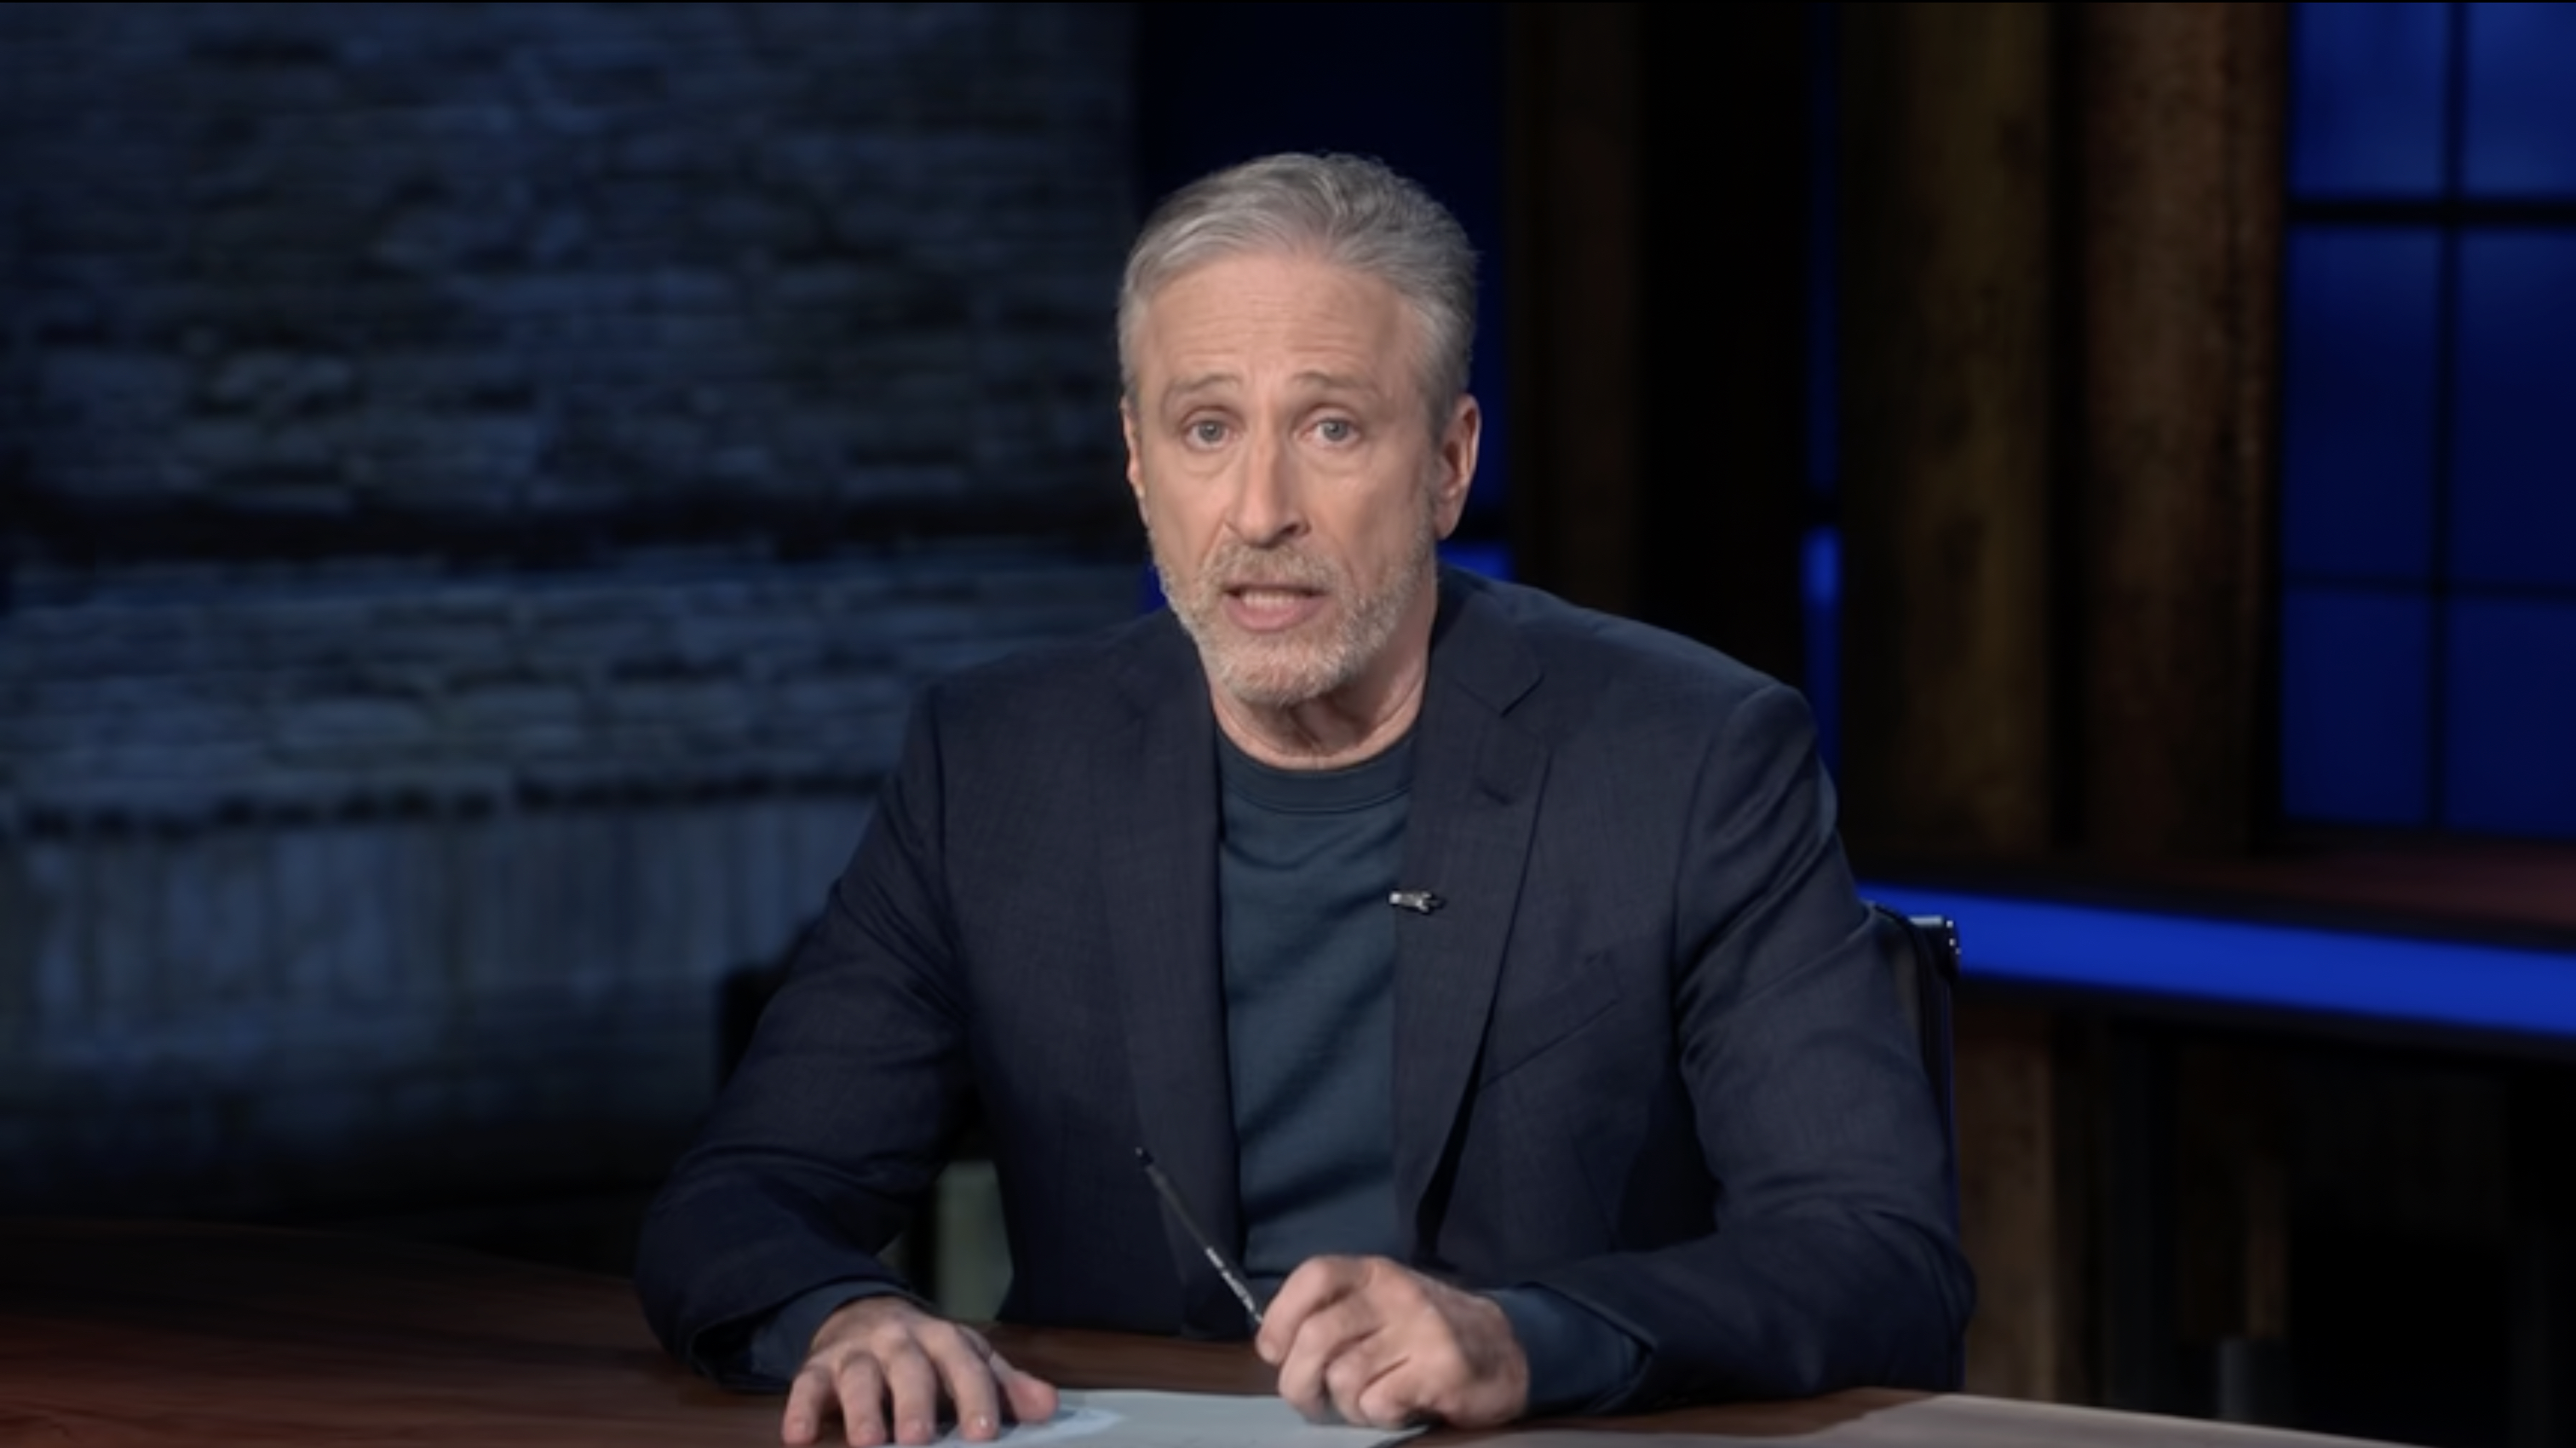 Jon Stewart Returning to 'The Daily Show' After Apple TV+ Series Cancelation